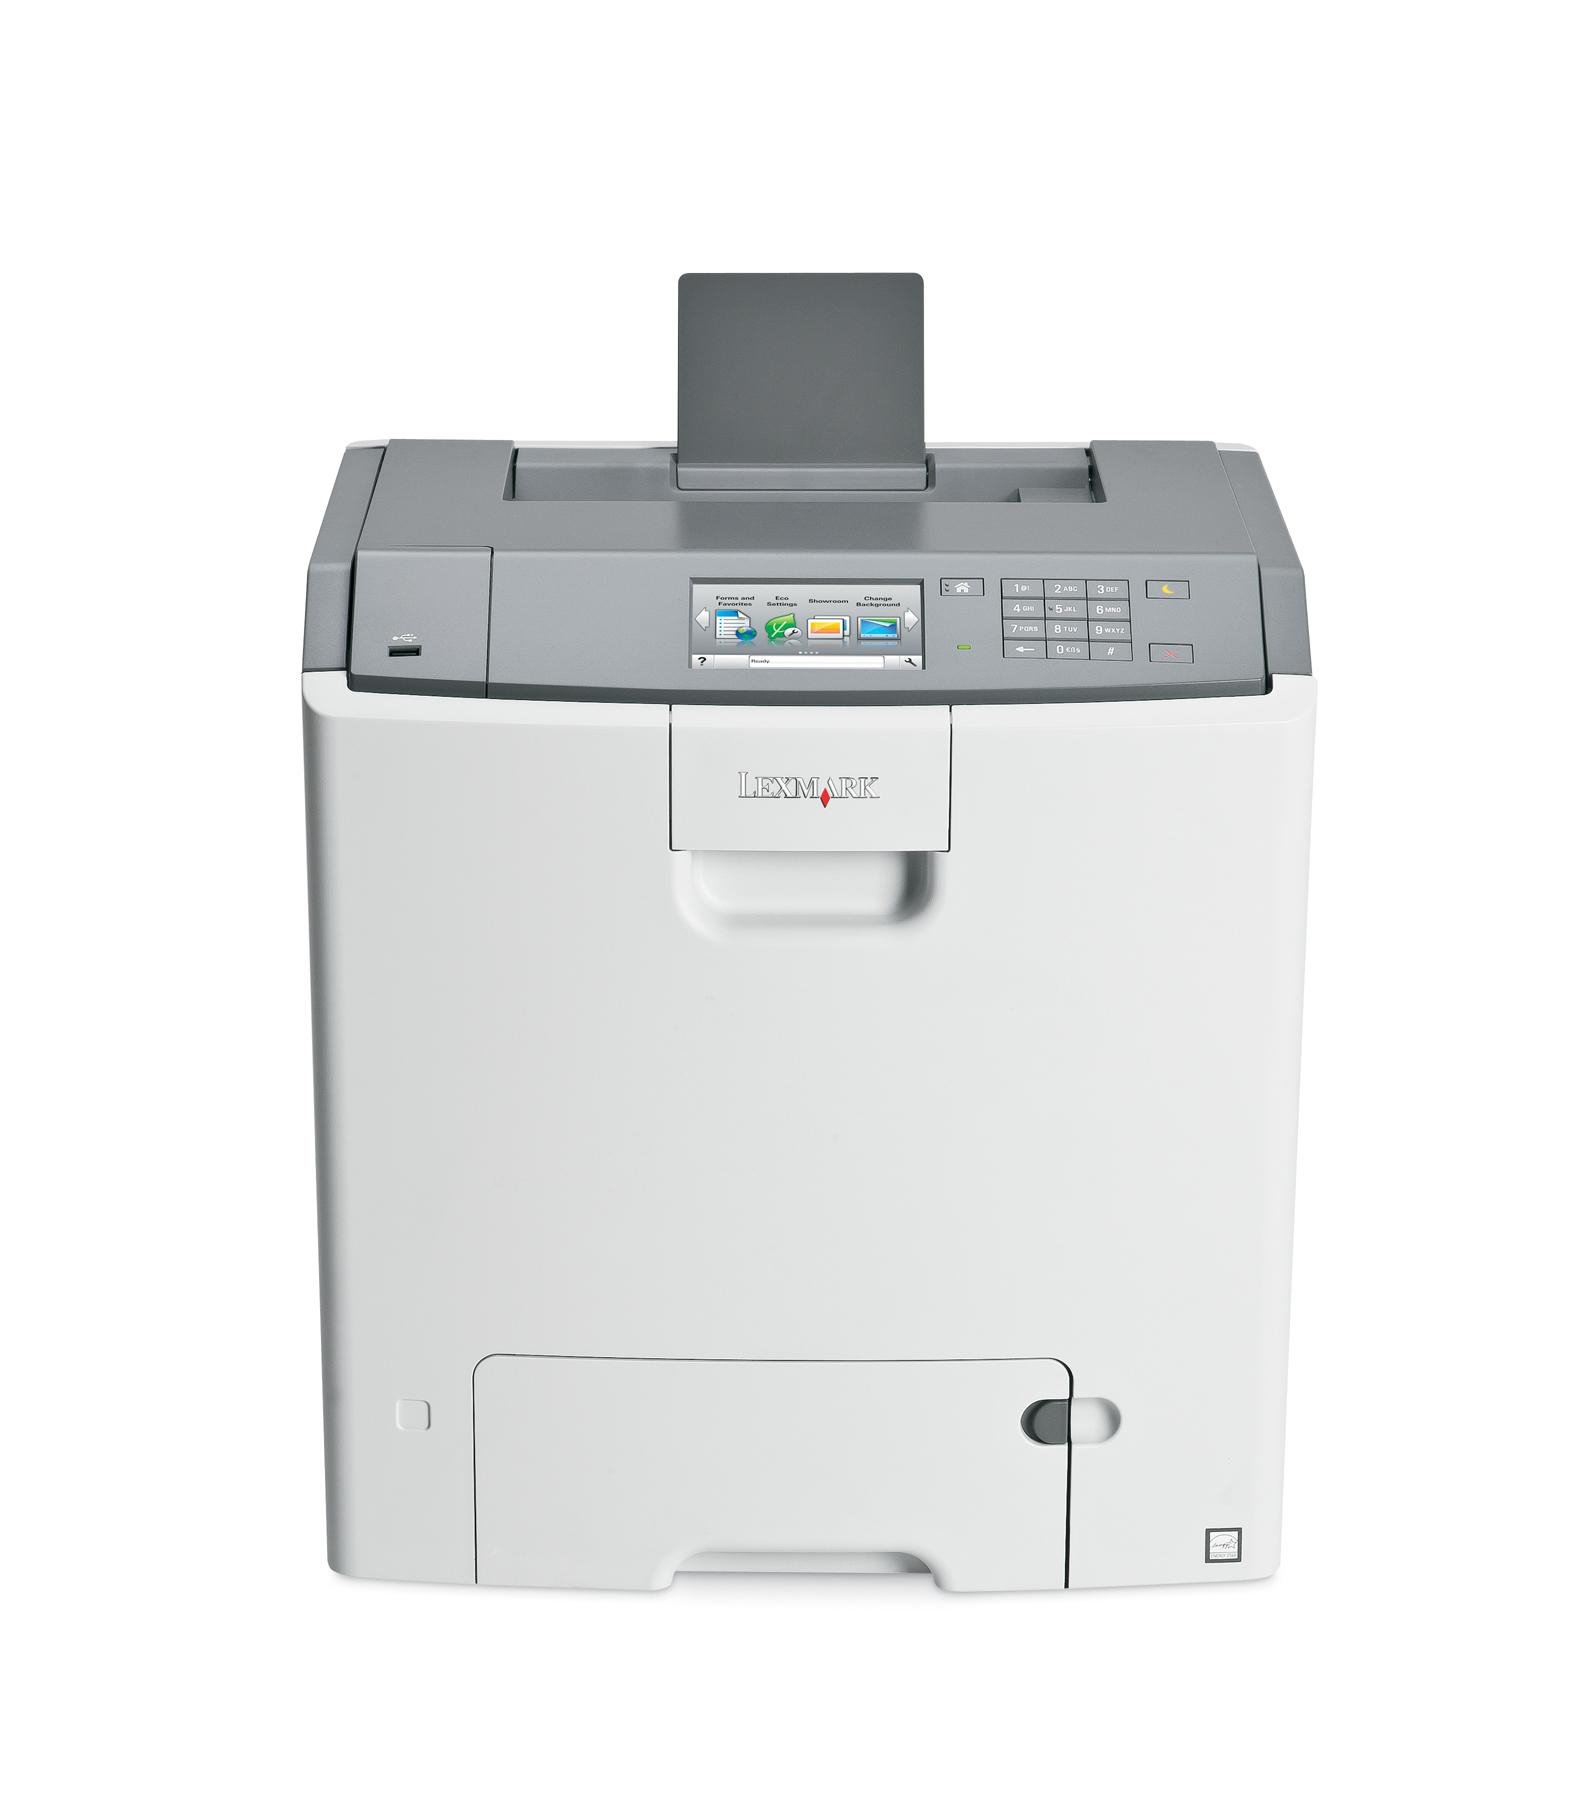 Hp psc 1210 all-in-one printer driver download